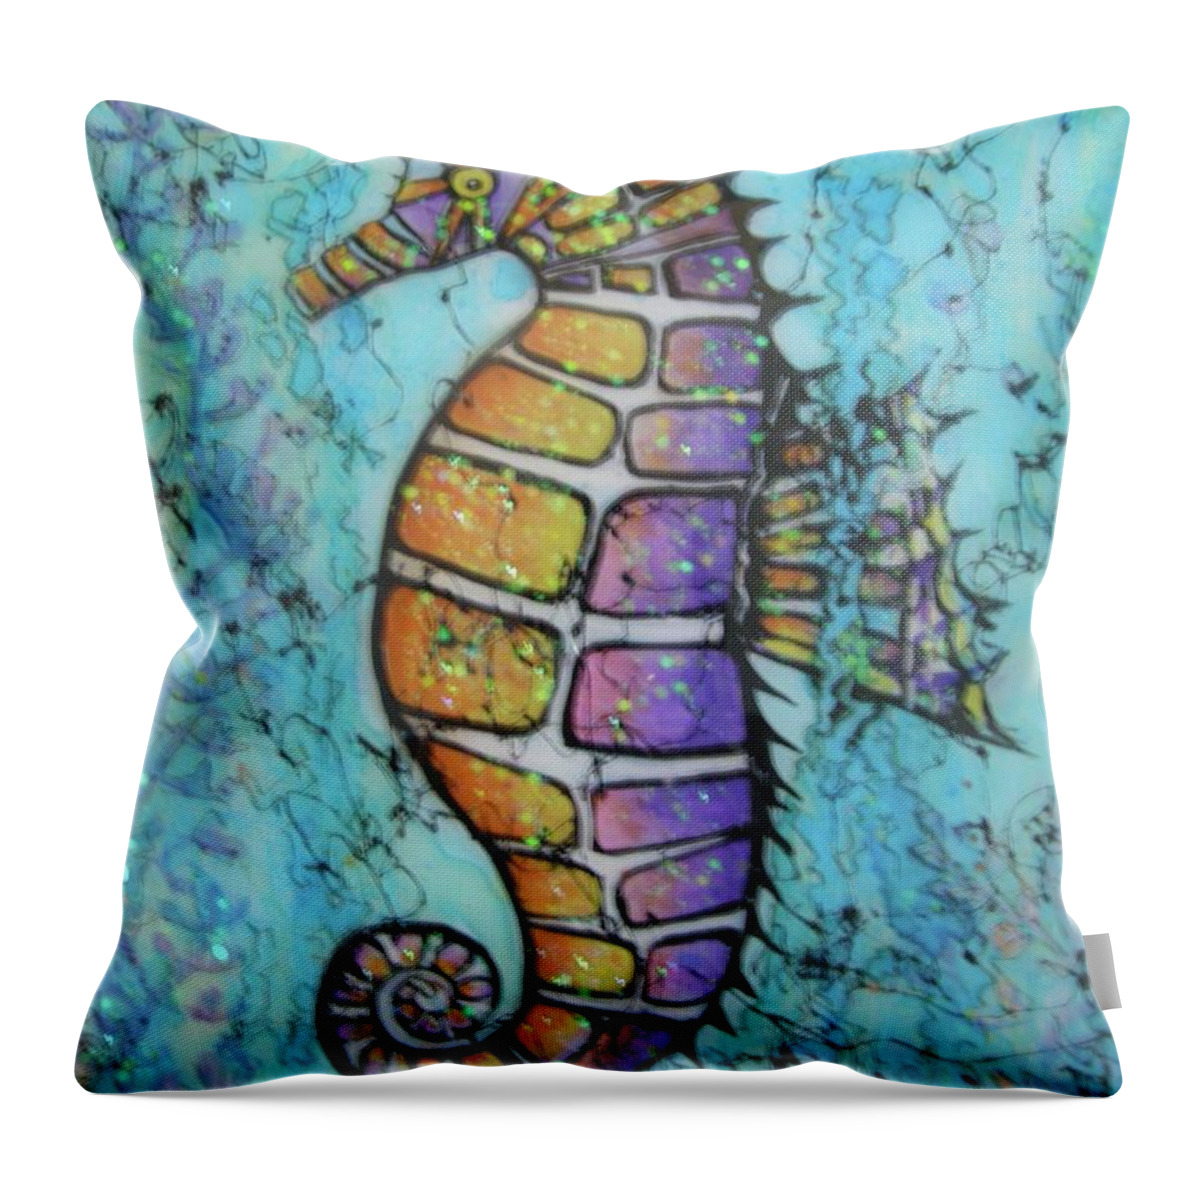 Turquoise Throw Pillow featuring the painting Seahorse Downunder by Midge Pippel